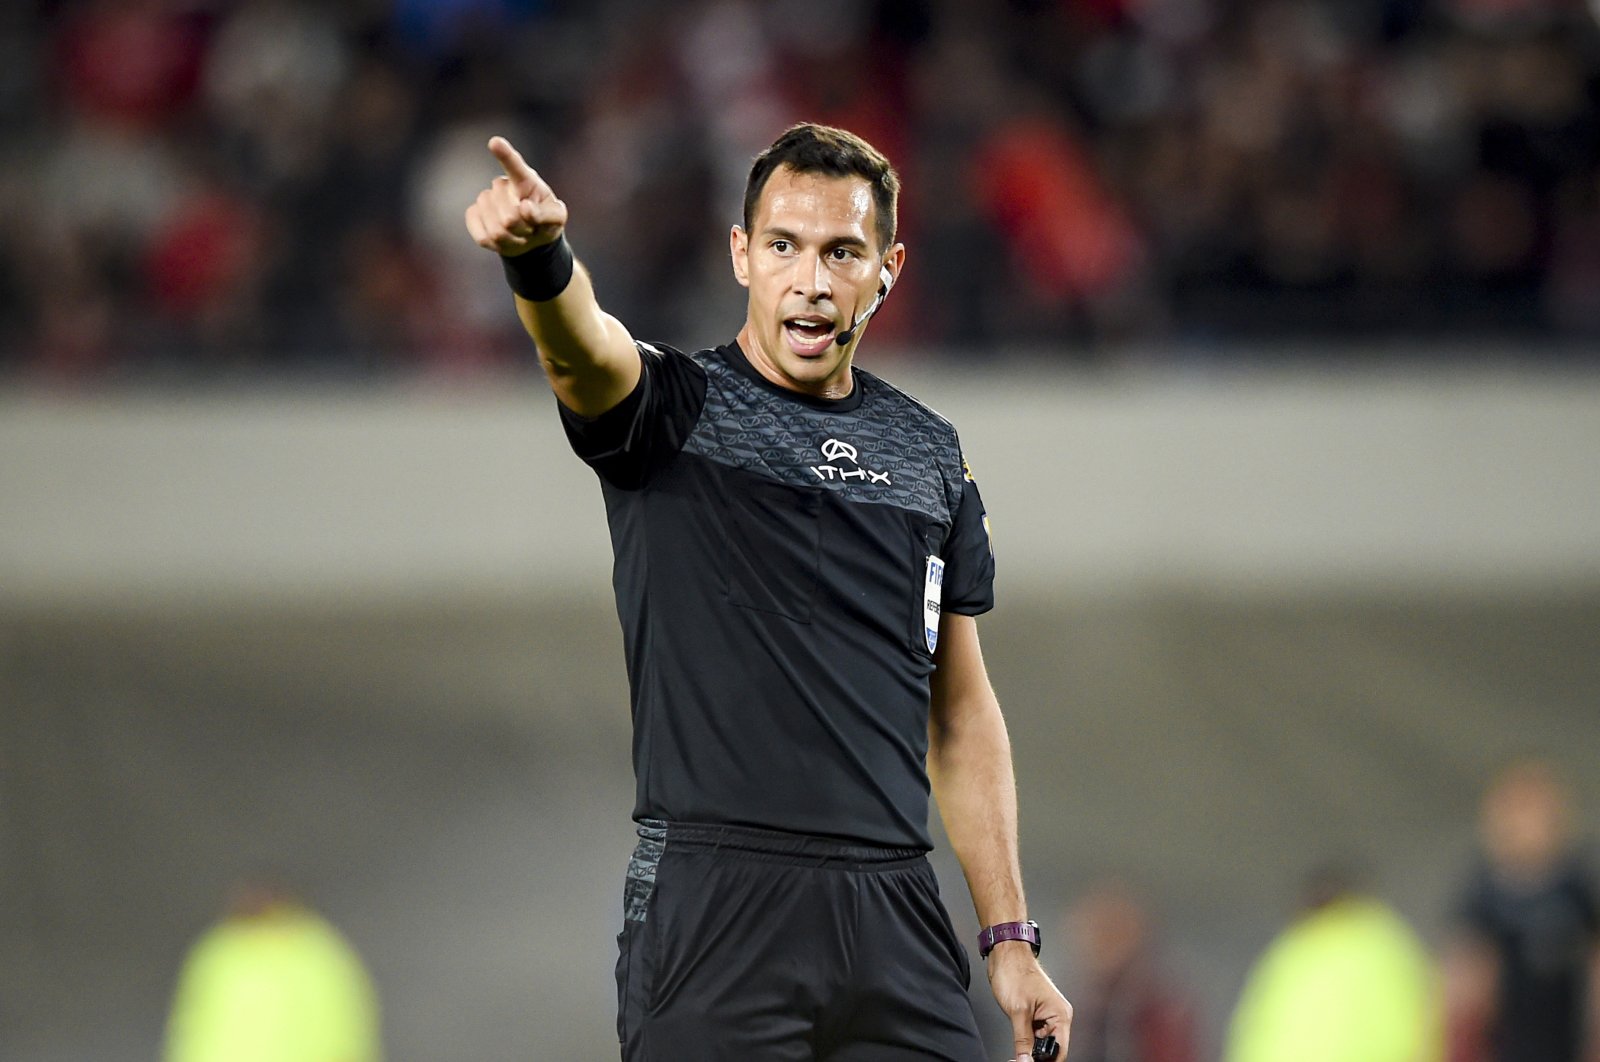 Referee Facundo Tello gestures during a match between River Plate and Talleres at Estadio Mas Monumental Antonio Vespucio Liberti, Buenos Aires, Argentina, Sept. 24, 2022. (Getty Images Photo)